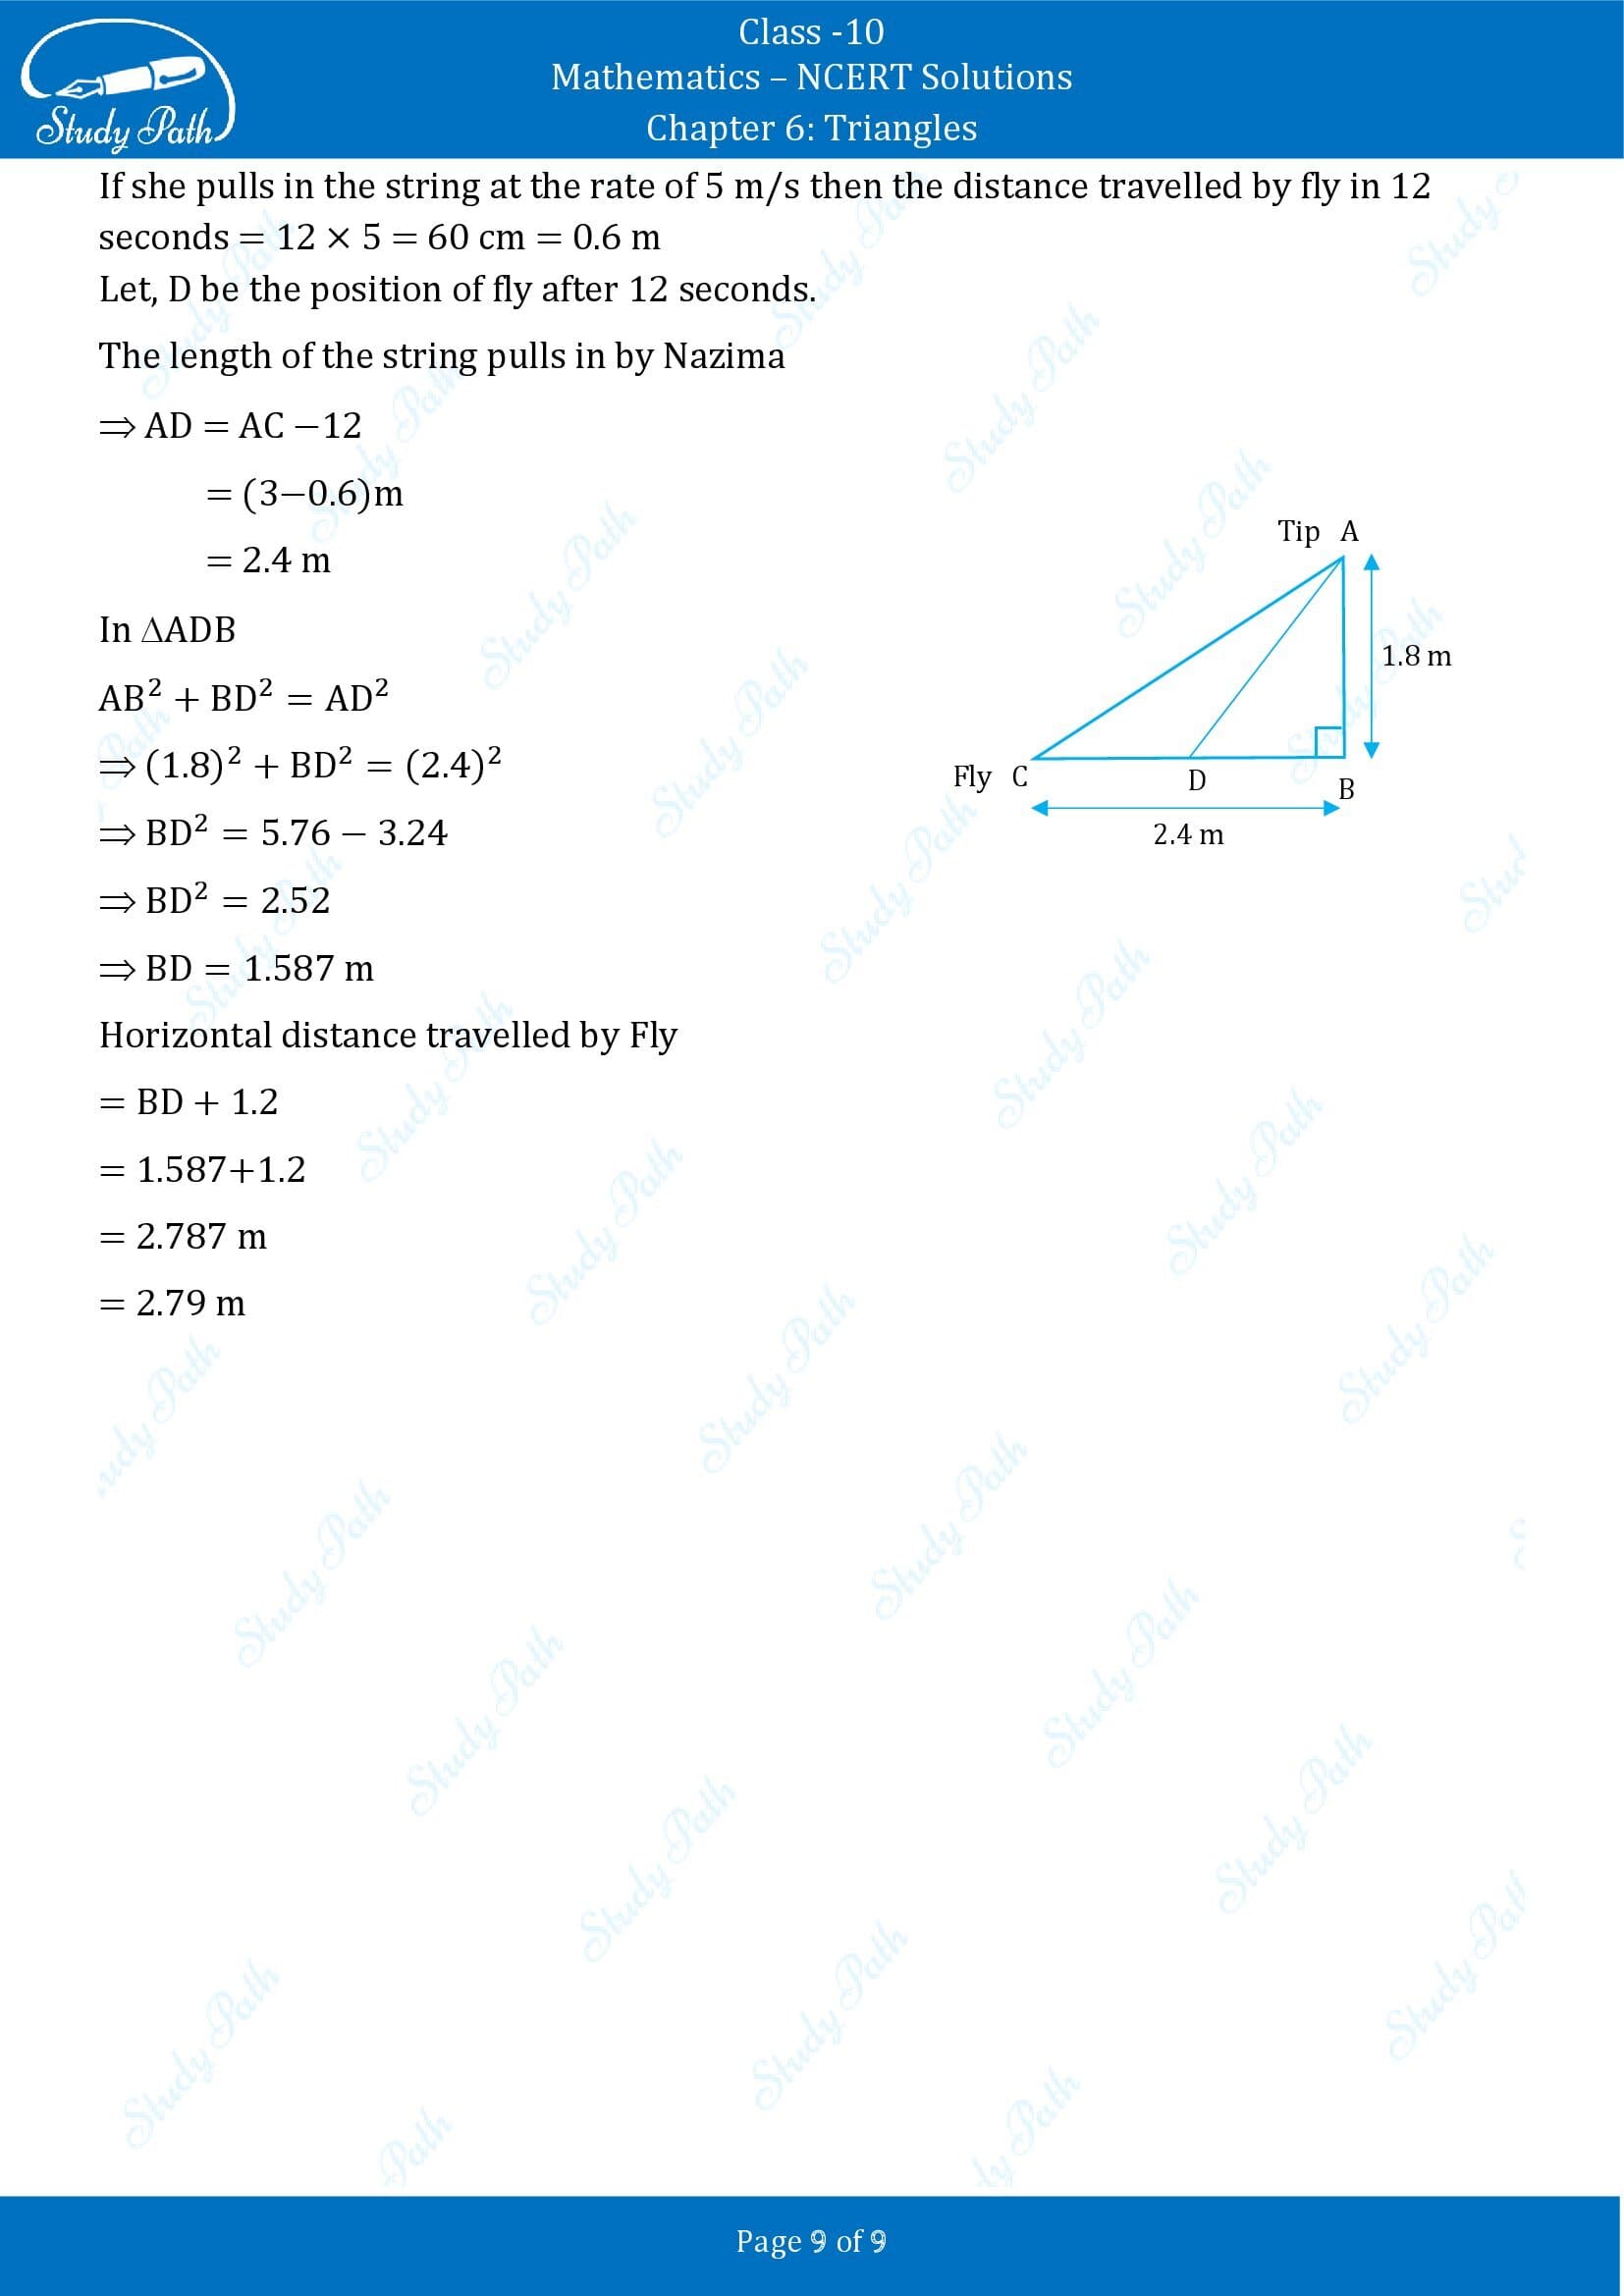 NCERT Solutions for Class 10 Maths Chapter 6 Triangles Exercise 6.6 00009